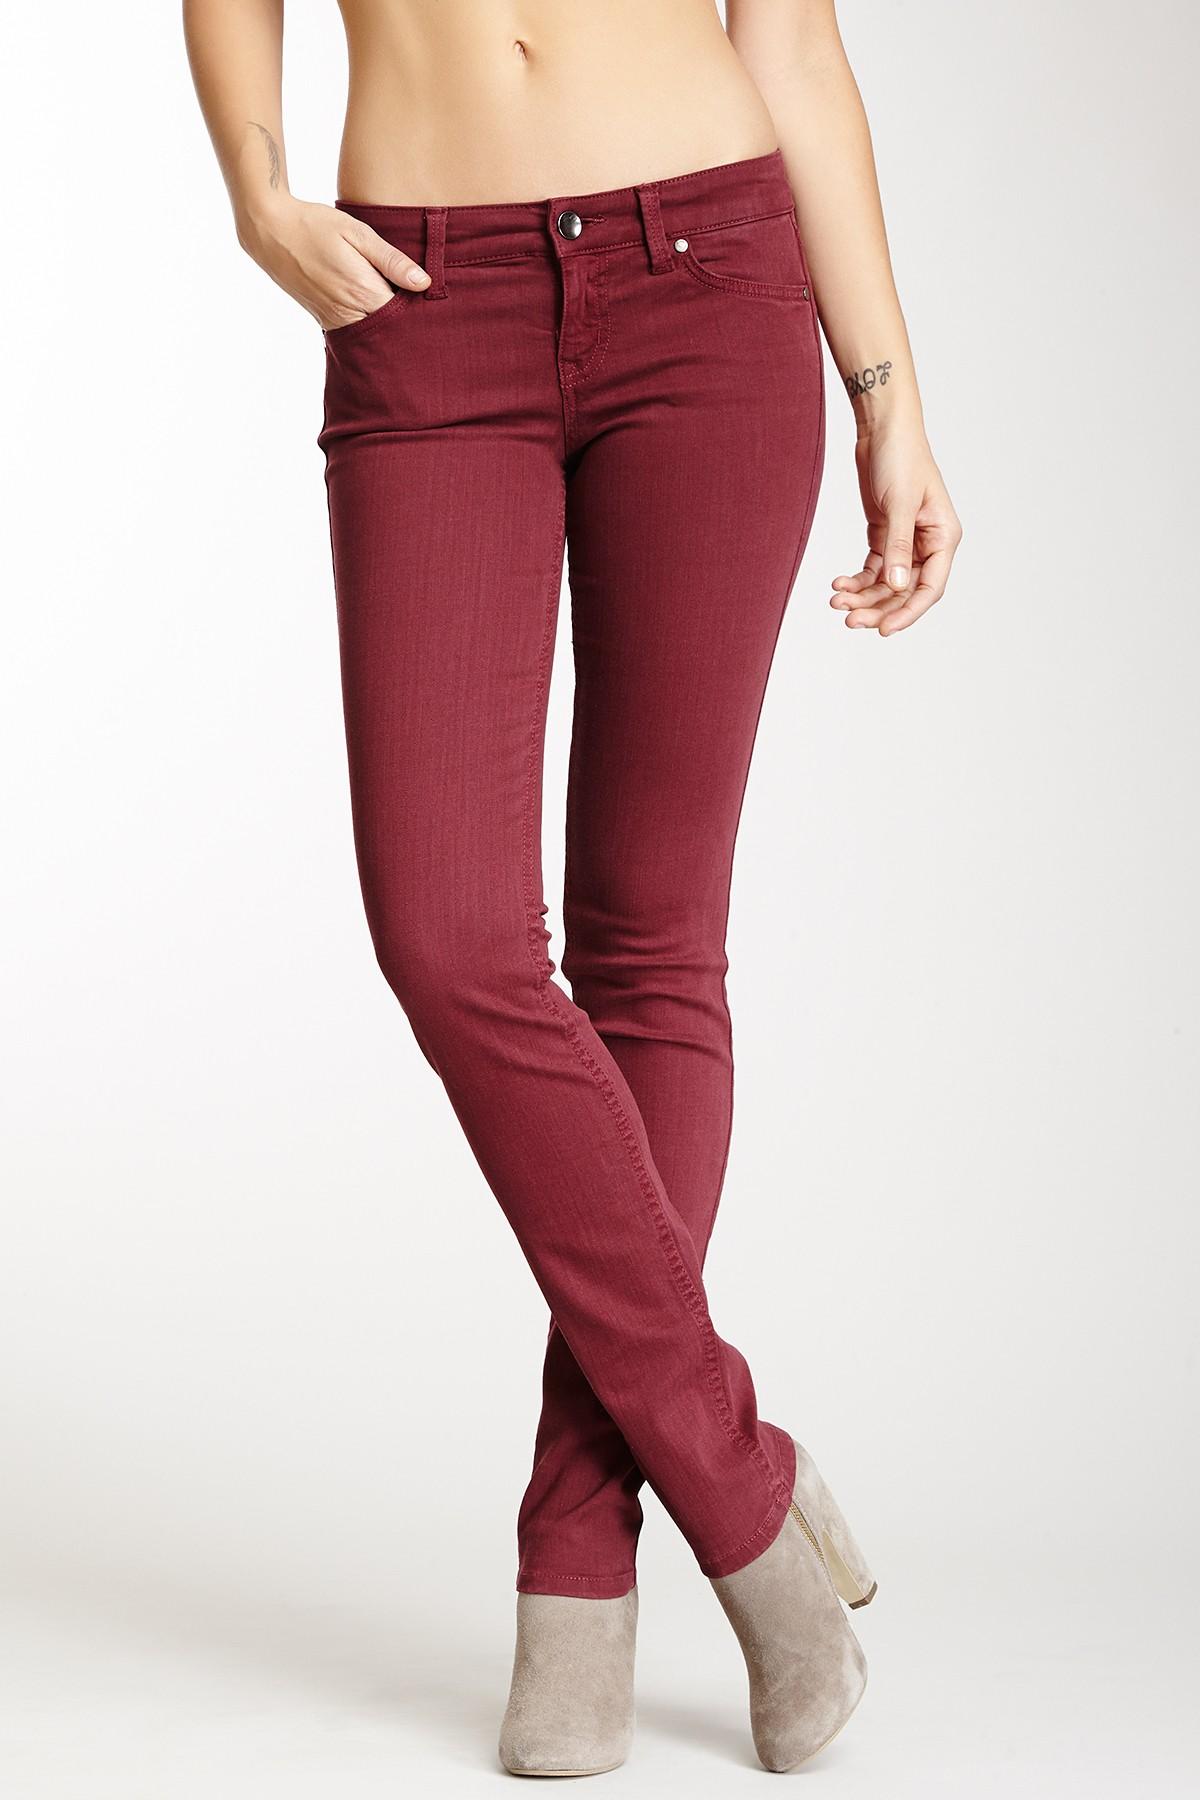 red straight leg jeans